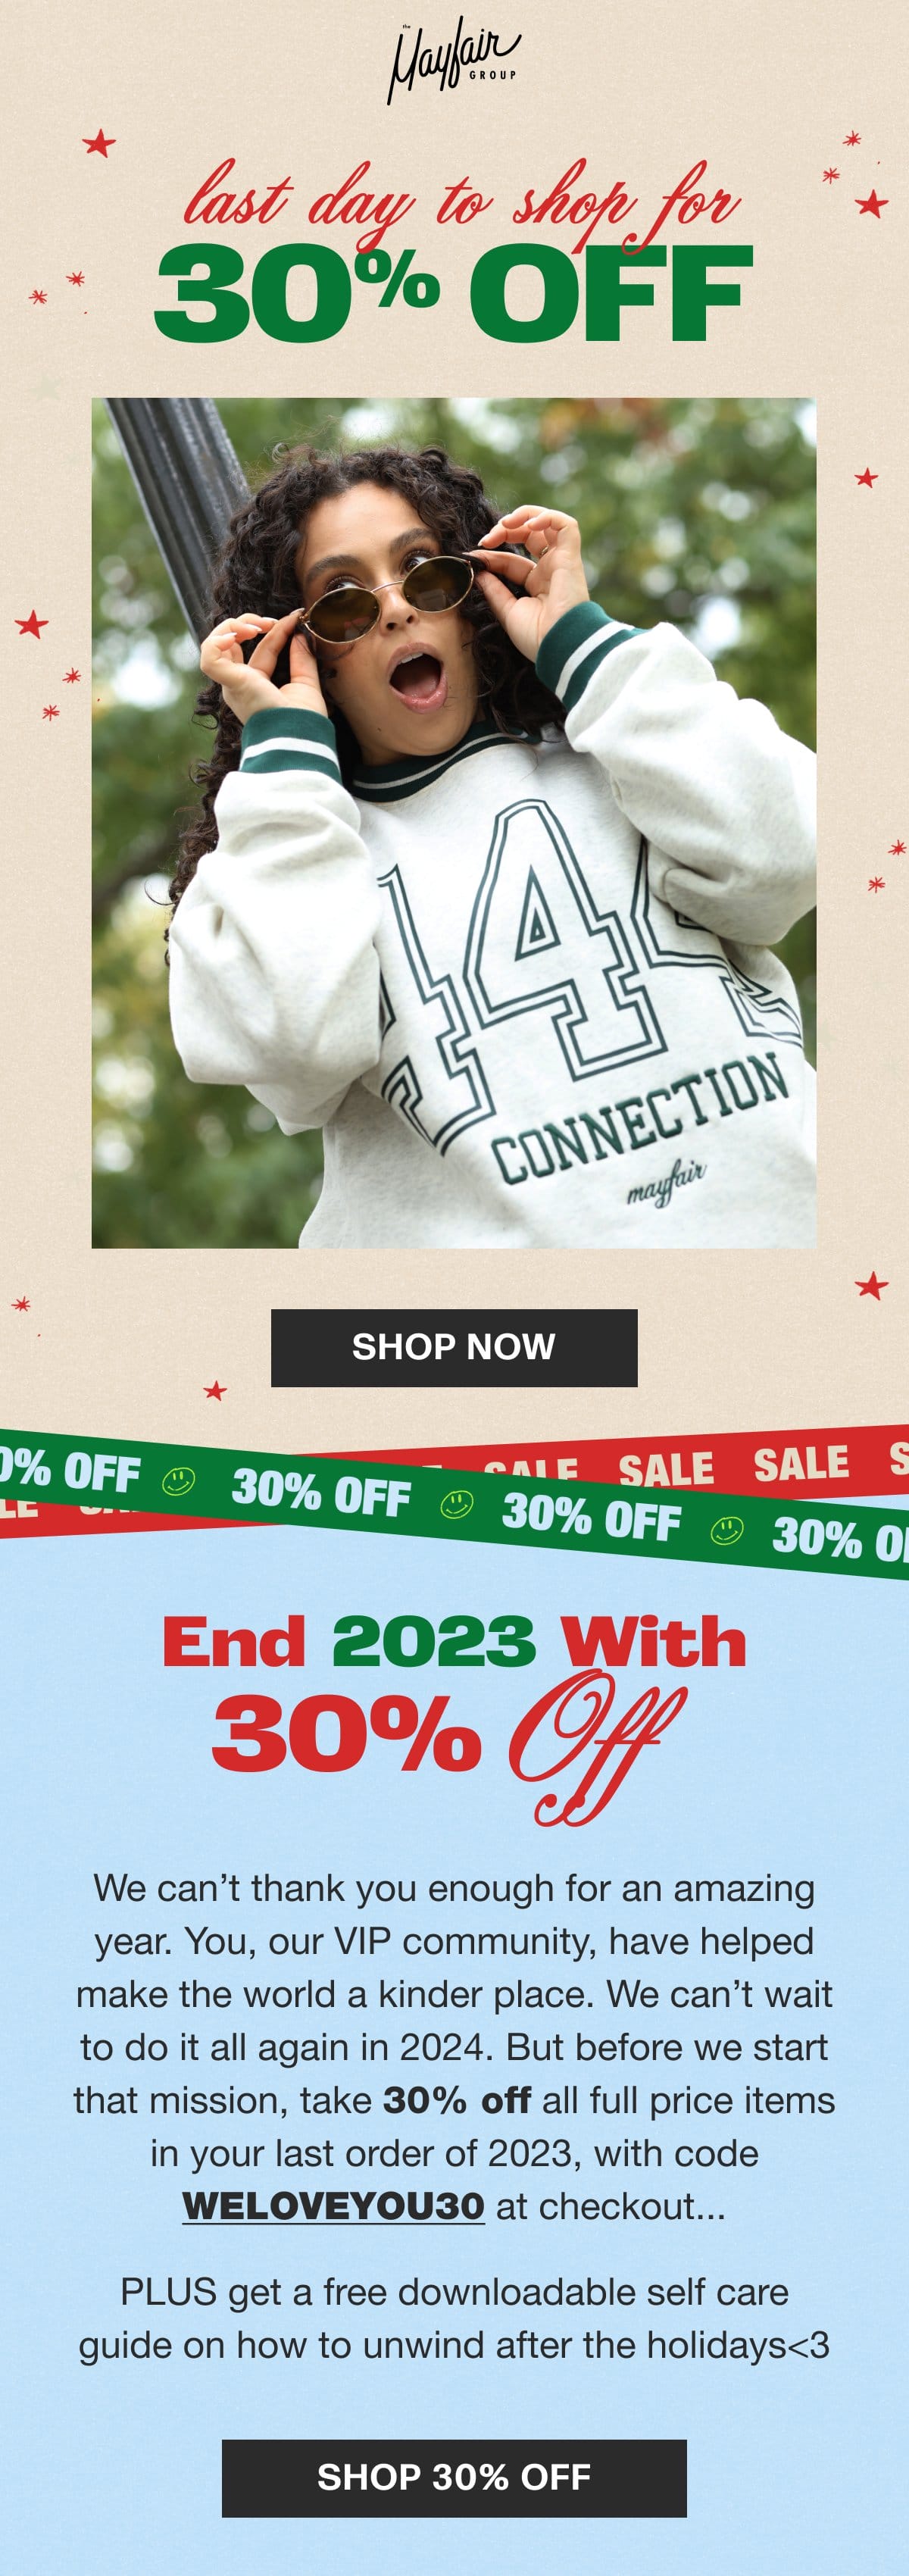 LAST SALE OF 2023! 30% OFF YOUR ORDER